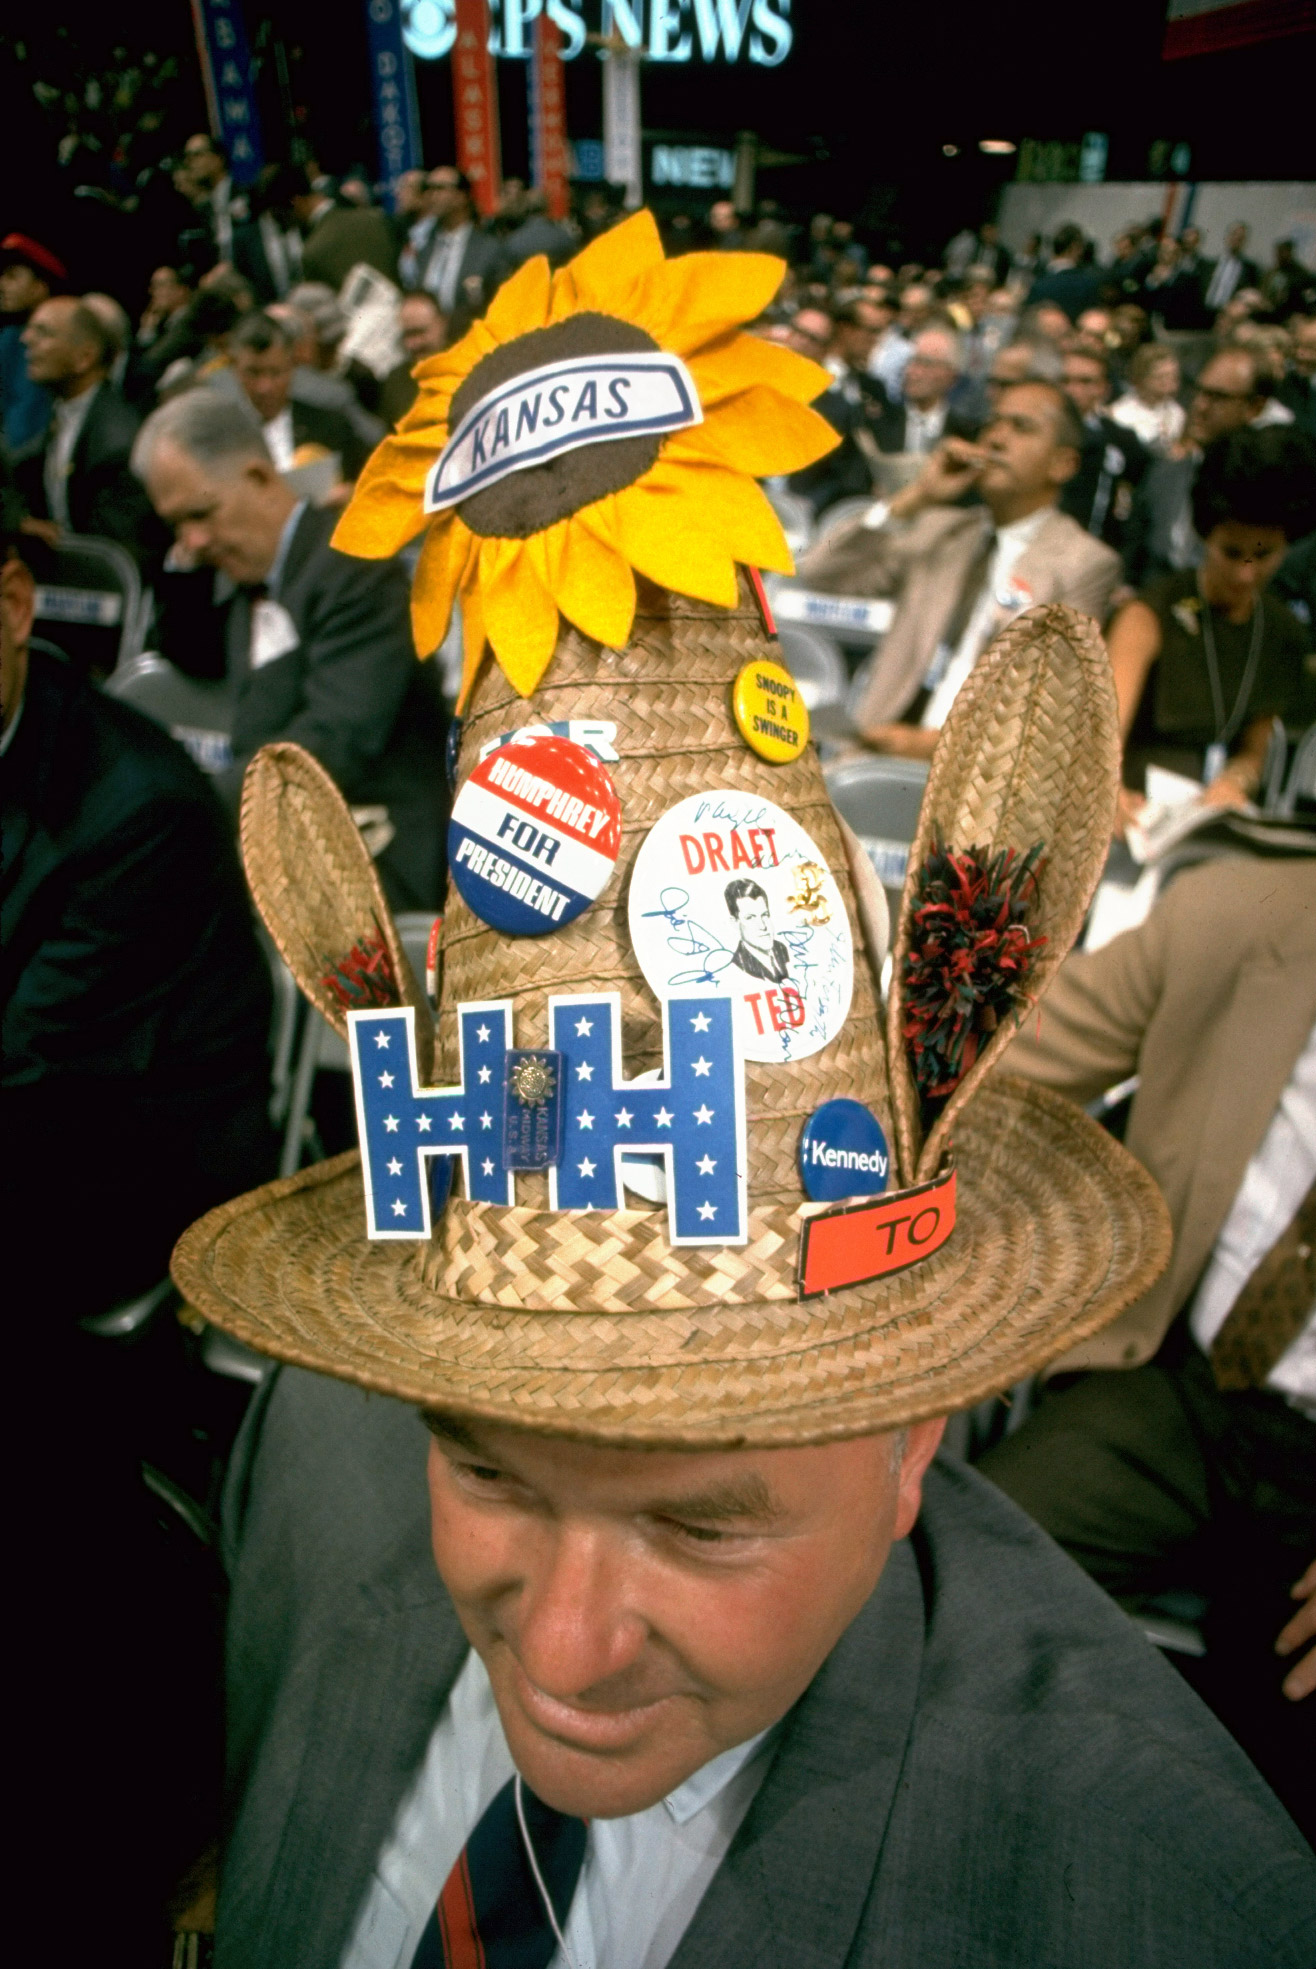 Colorful hat supporting Hubert Humphrey at the Democratic National Convention, 1968.